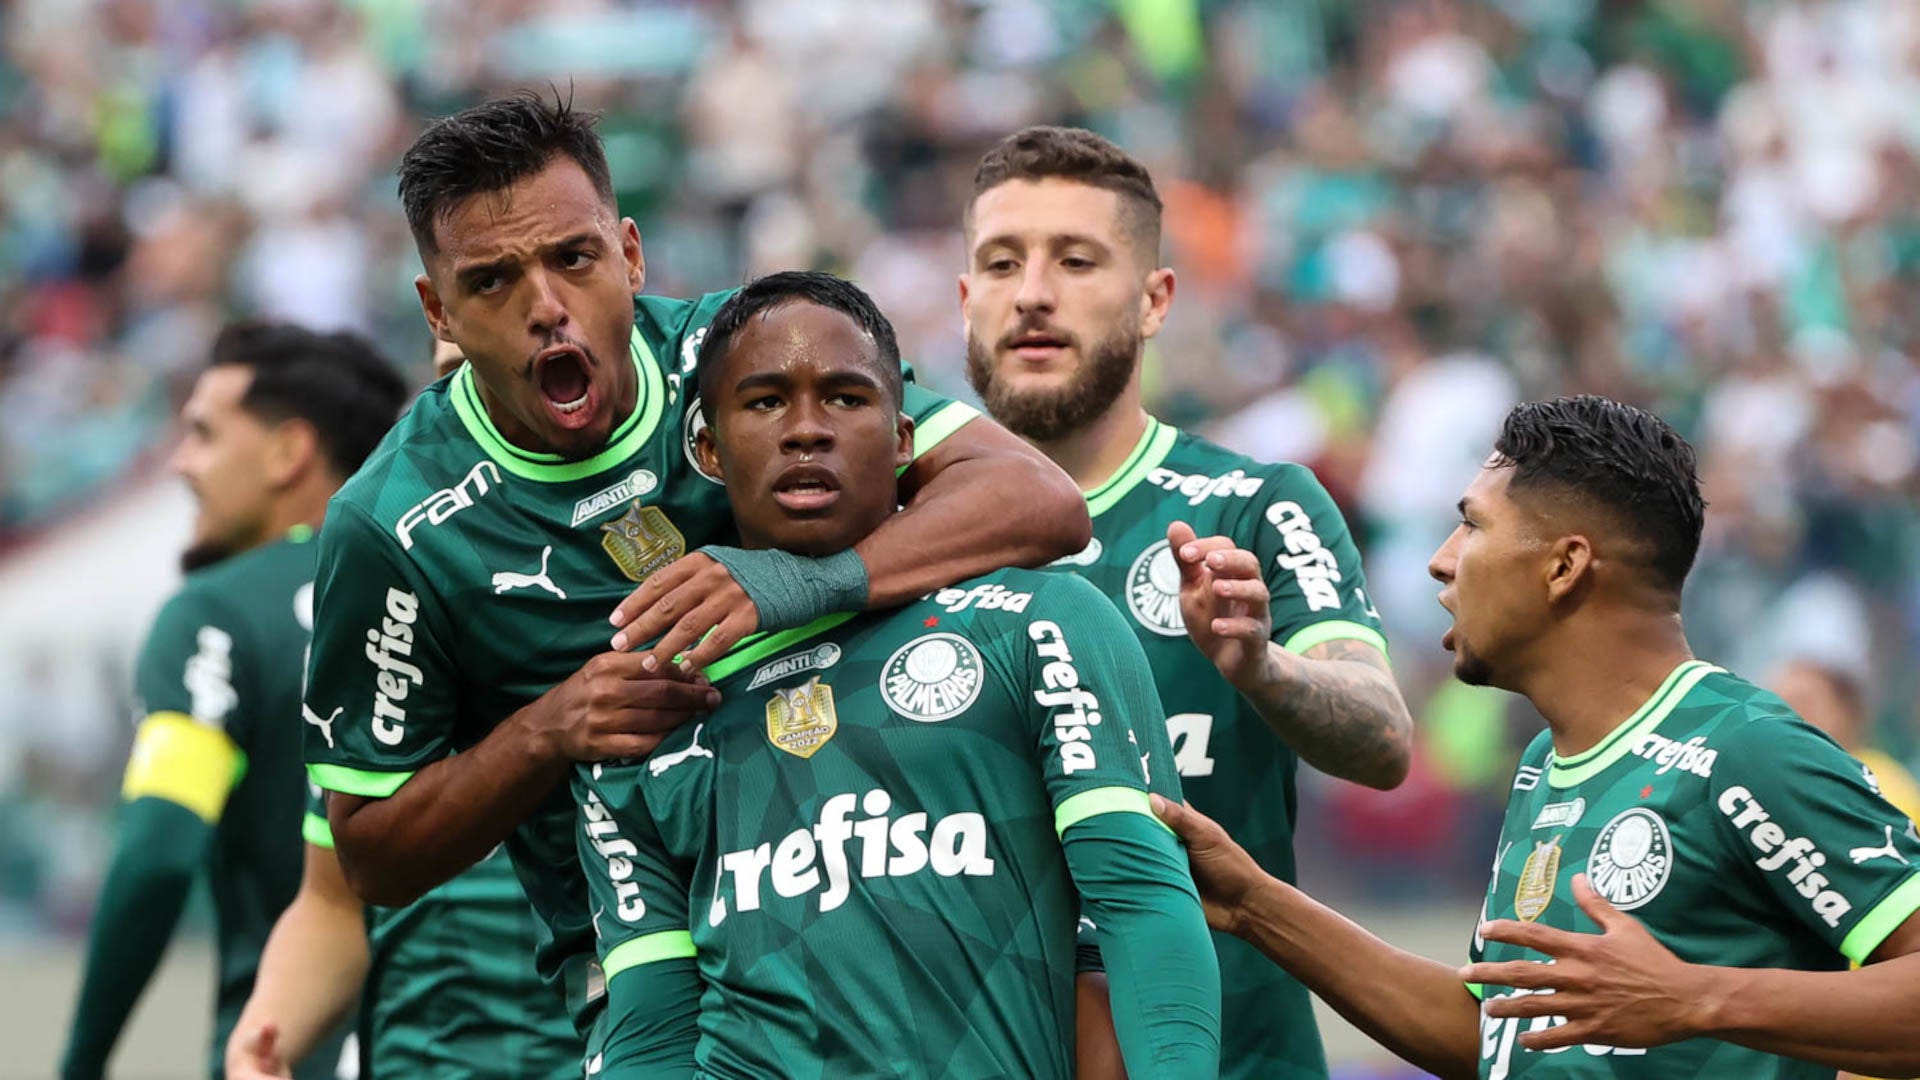 All Things Brasil™ 🇧🇷 on X: Palmeiras last 60 home games: ✓ 48 Wins ⚠️  10 Draws ❌ 02 Defeats Currently 35 games unbeaten (11 months) ⁃ 129 goals  scored (2.15 per